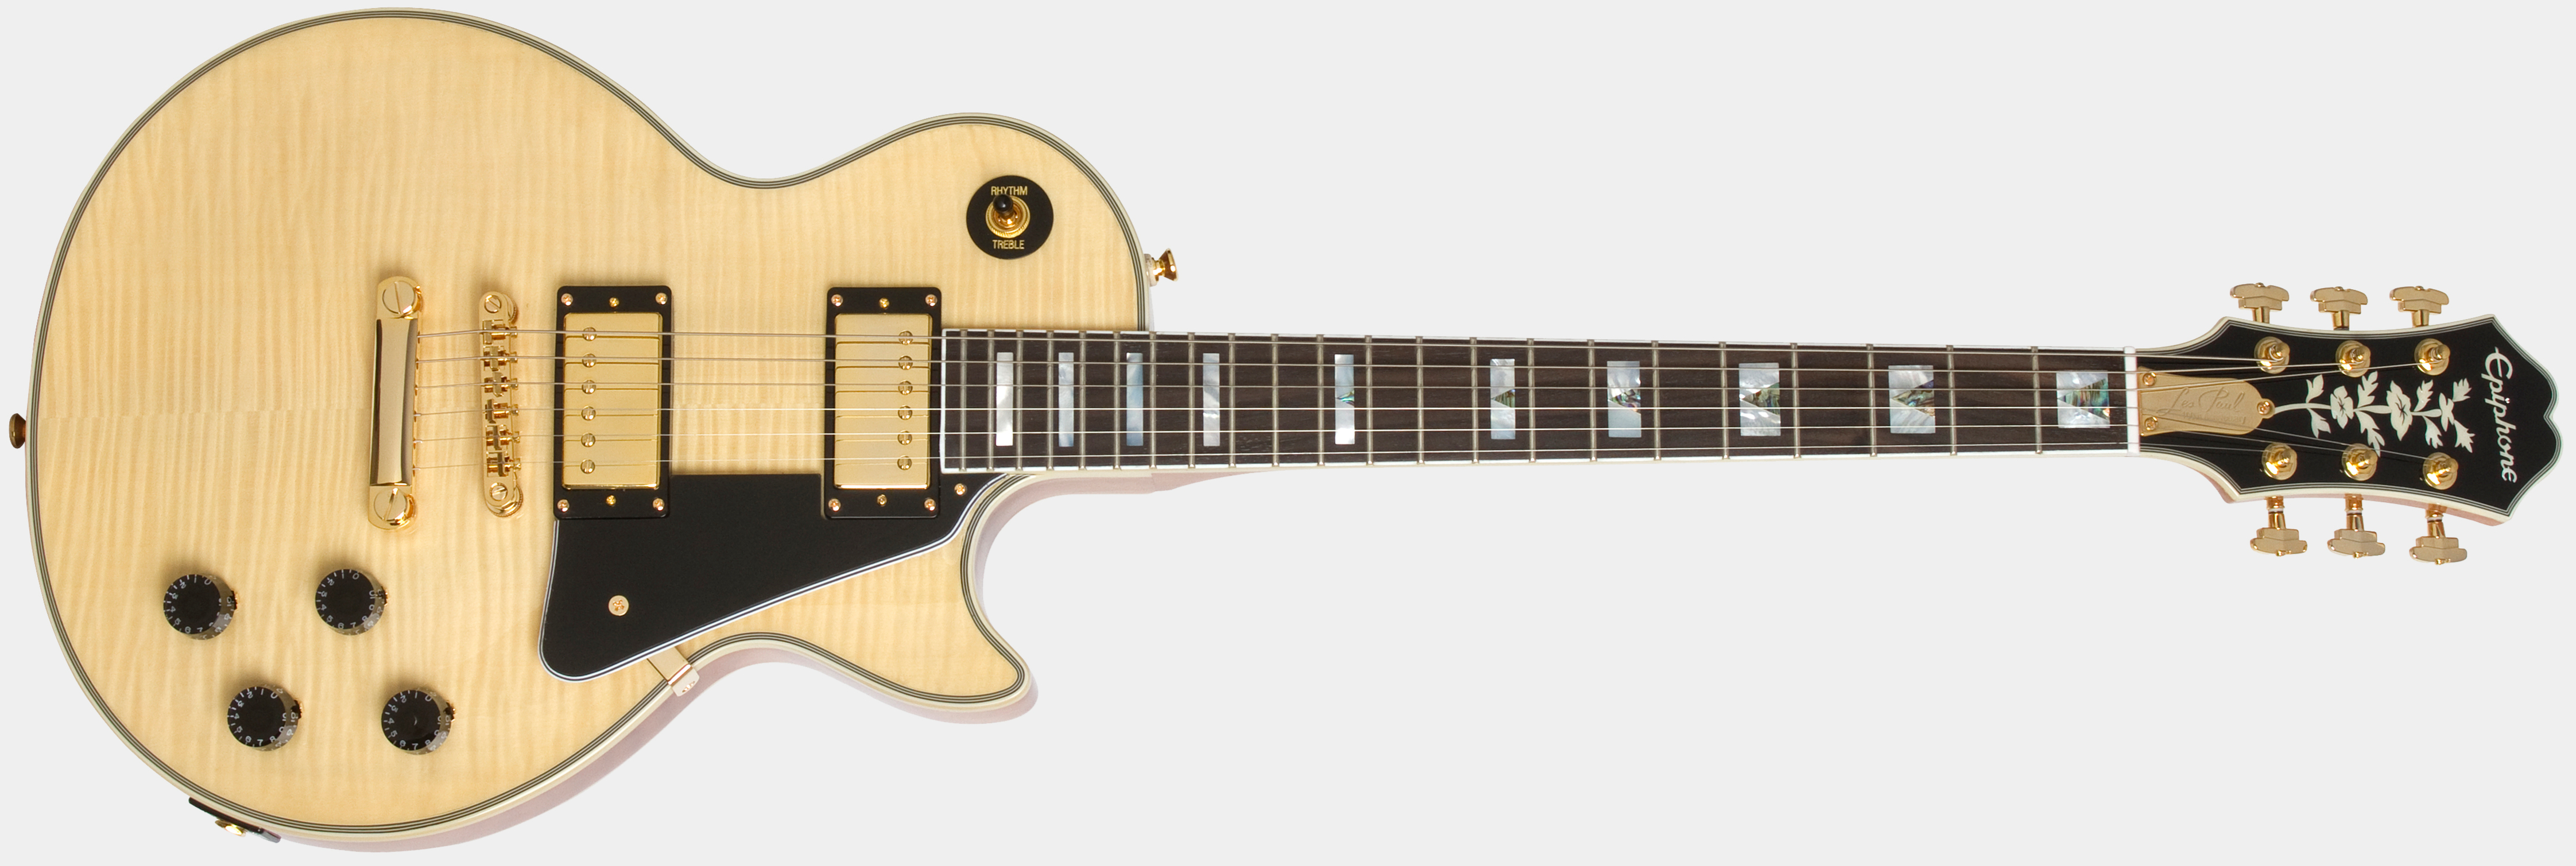 Epiphone Limited Edition Les Paul Custom Pro Th Anniversary Natural Music Store Professional